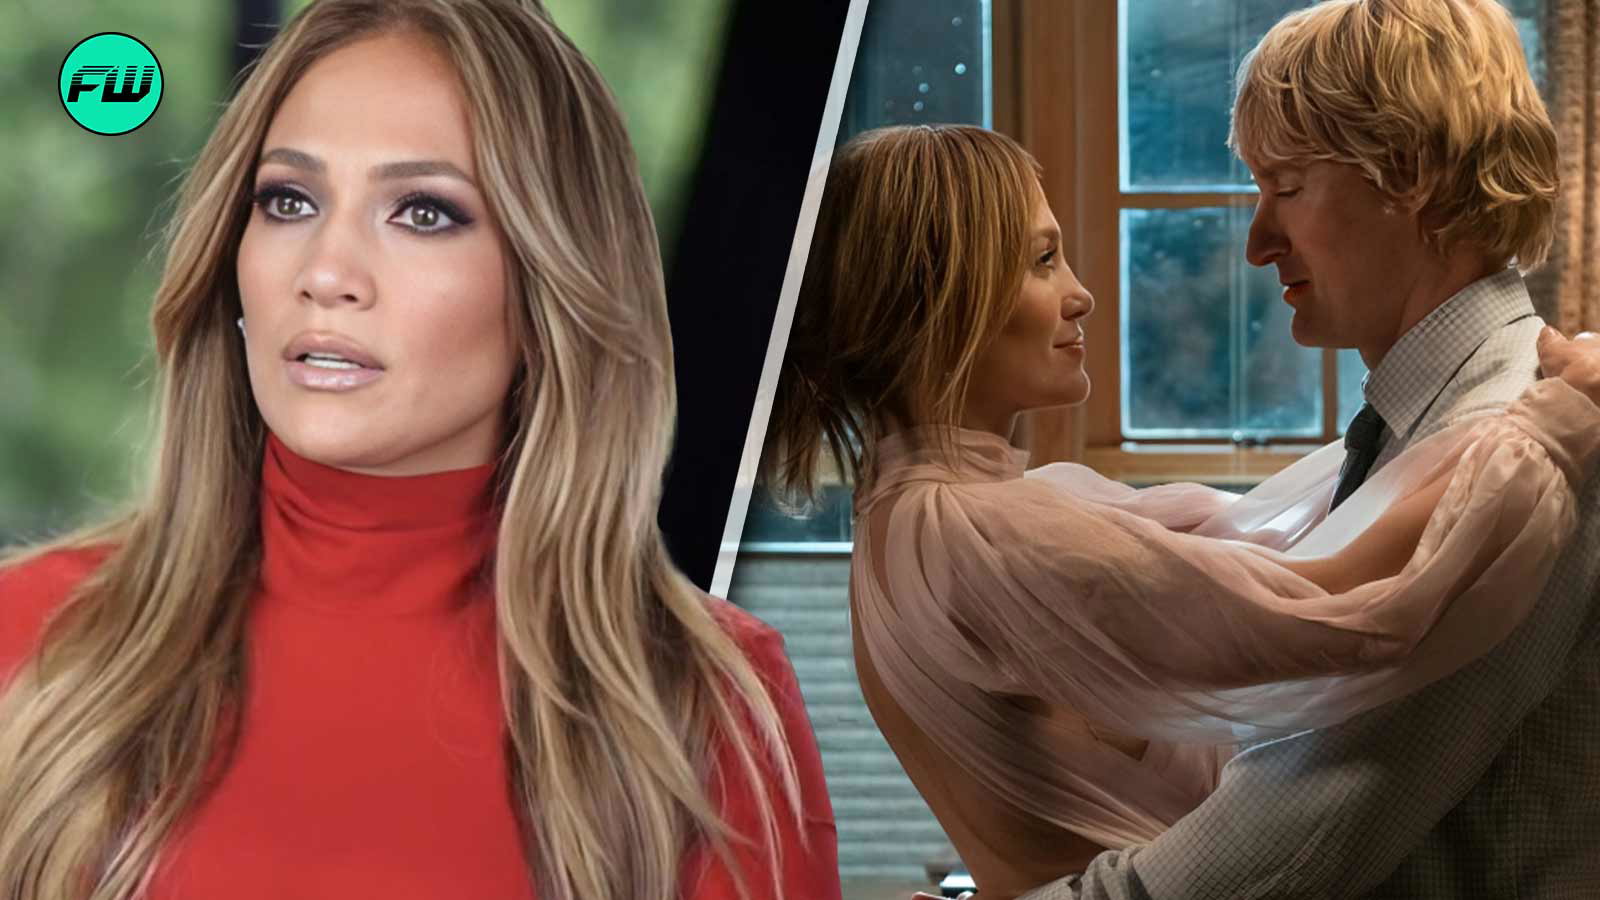 “If you are gonna be a fake..”: Jennifer Lopez Called Out For Awfully Editing Her Photo That Makes Her Look Like a Goddess at 55